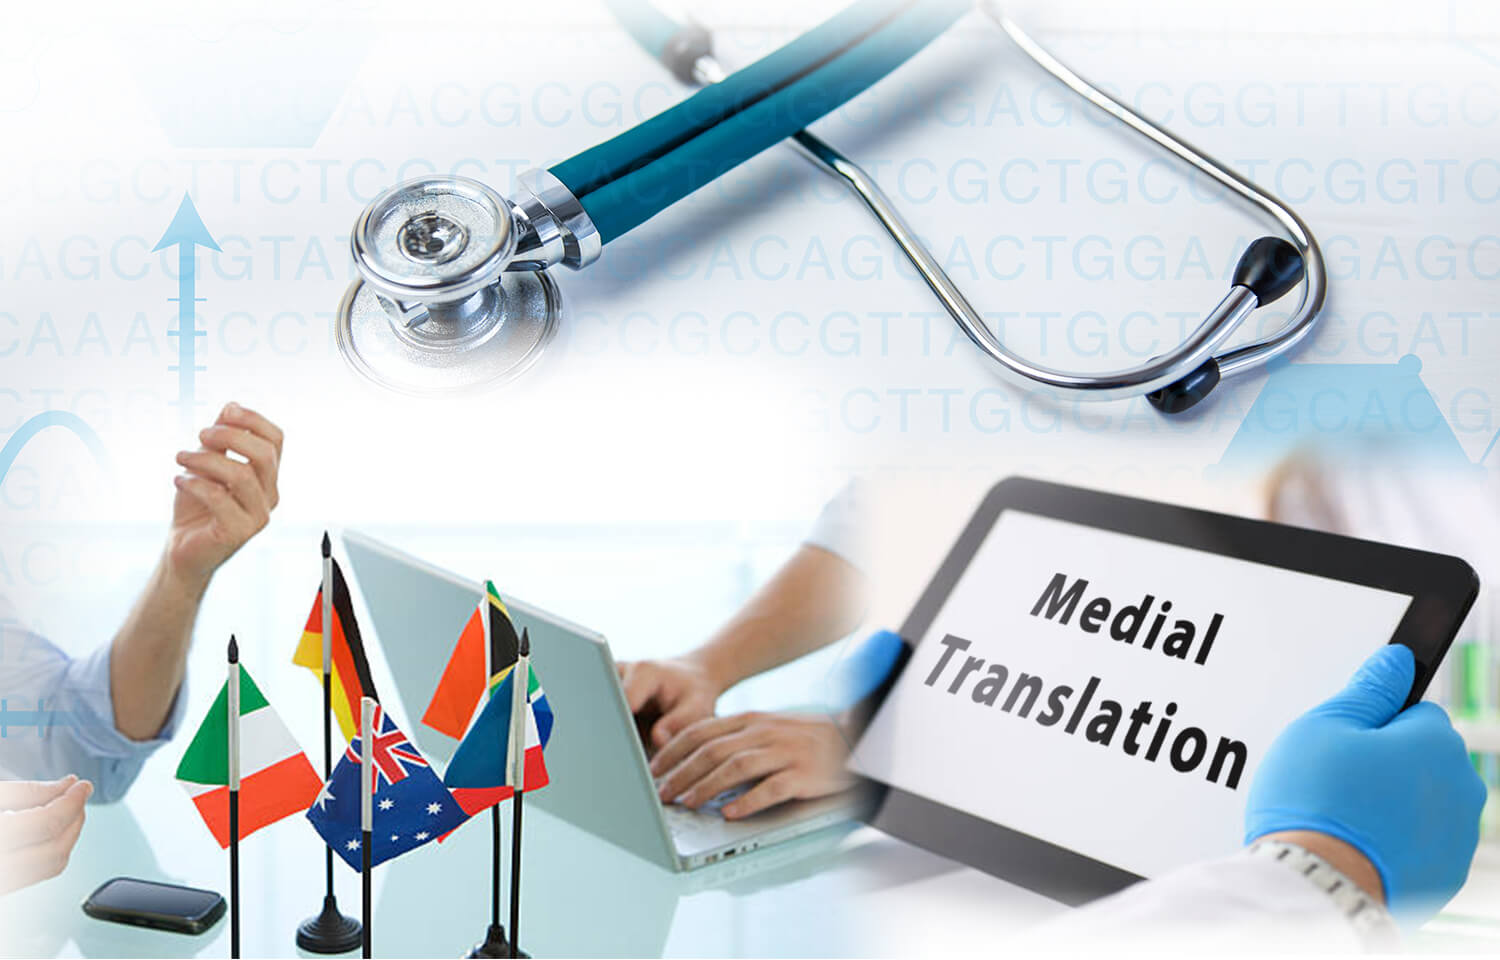 What are the types of Medical translations and interpretation services?